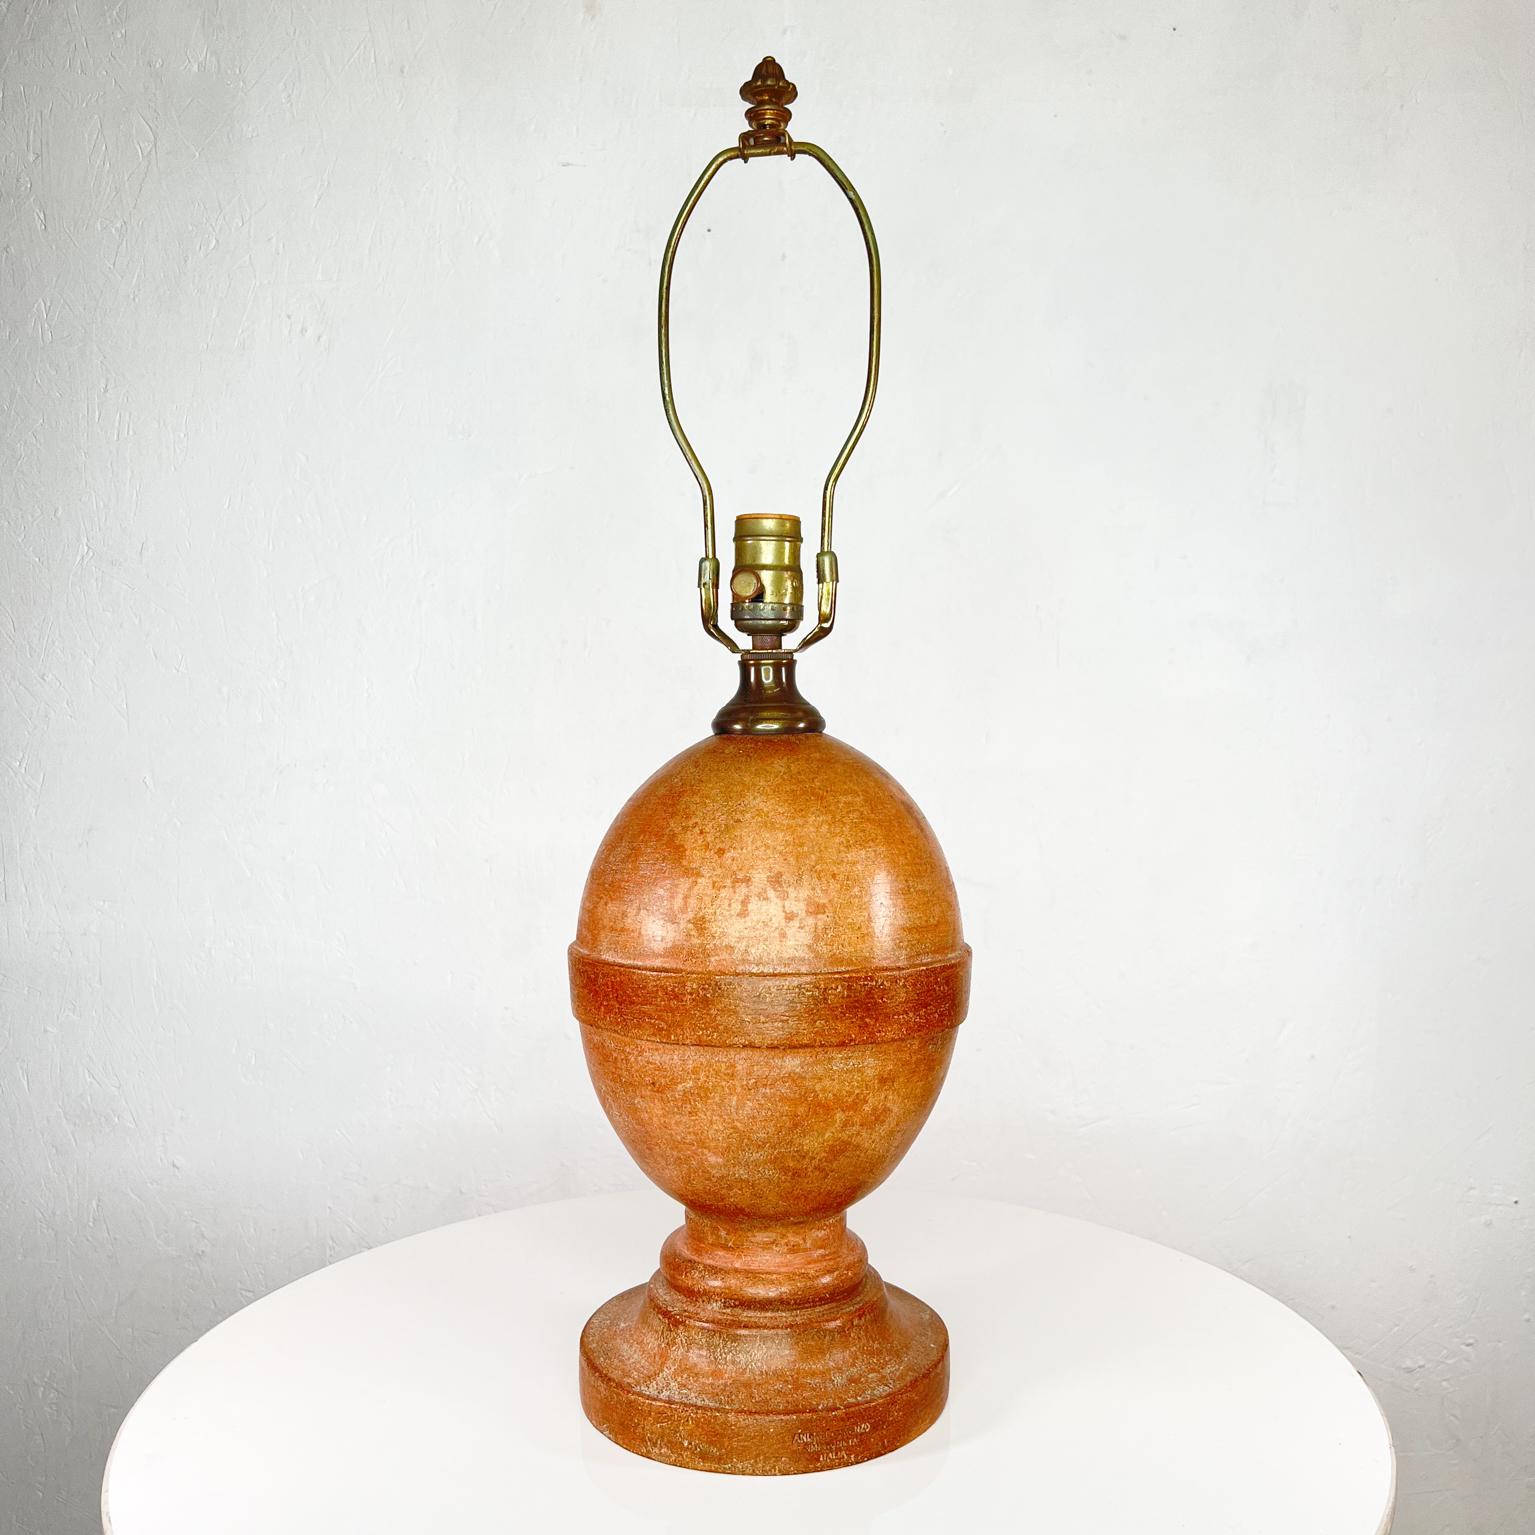 Lorenzo Andrei handcrafted Ceramic Terracotta lamp Poggi Ugo Italy
High quality Italian Ceramic stunning terracotta craftsmanship
Measures: 16.5 to socket x 7 diameter approximately
Preowned original vintage unrestored condition.
See images